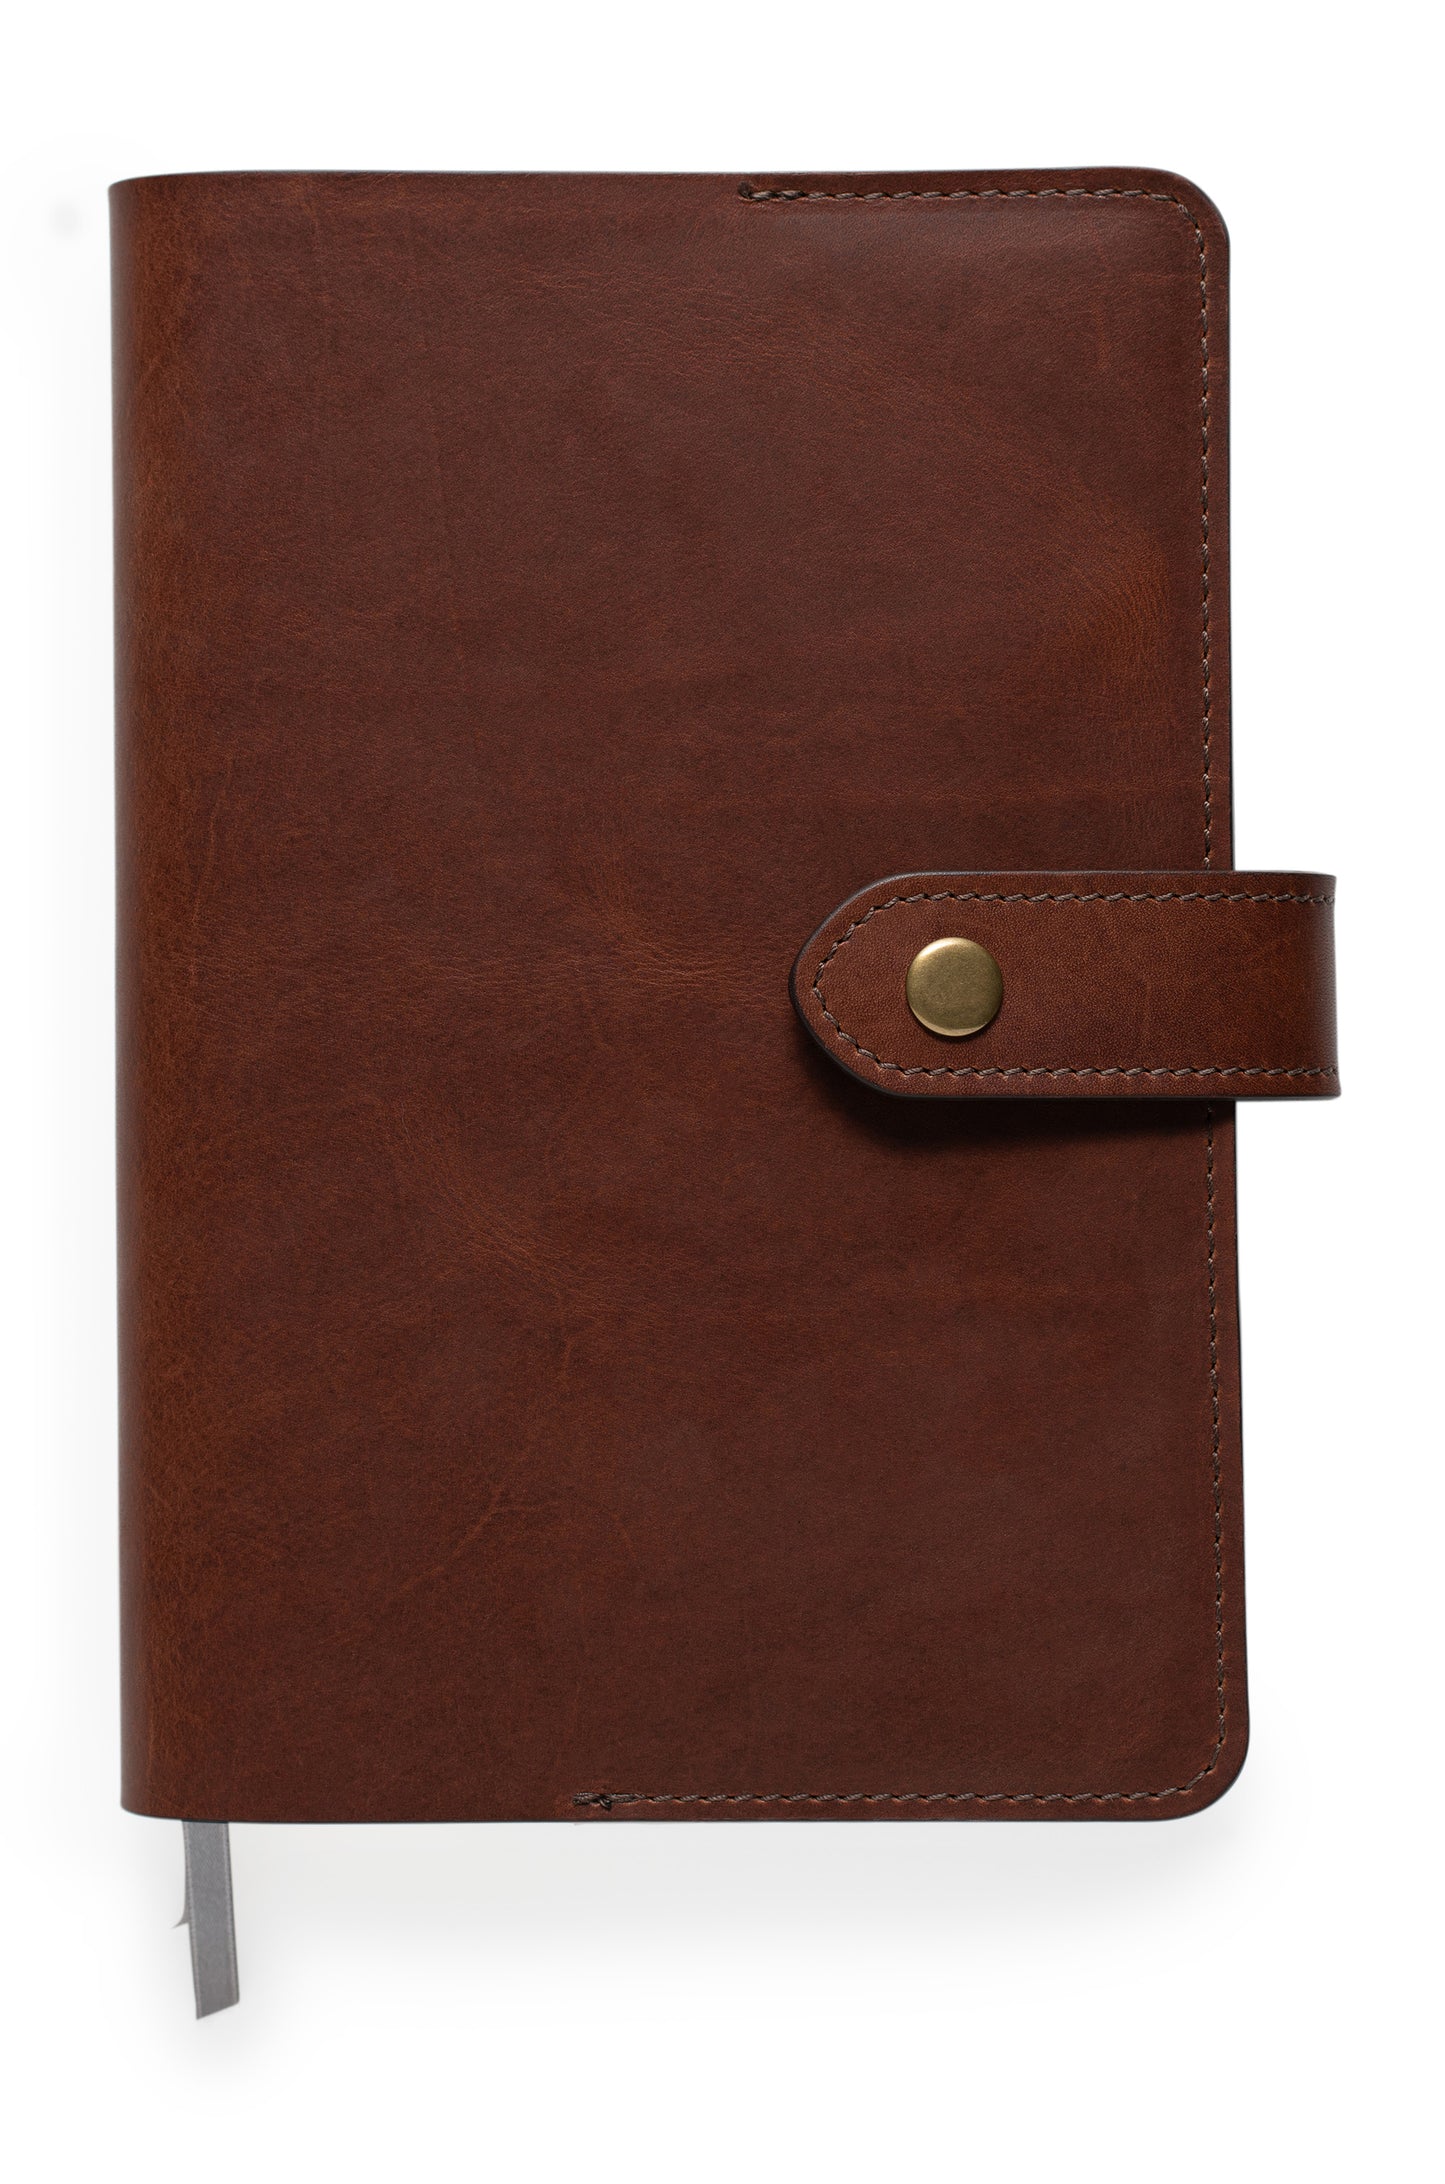 full grain leather planner cover designed to fit full focus planner by Michael Hyatt in vintage brown leather with snap closure